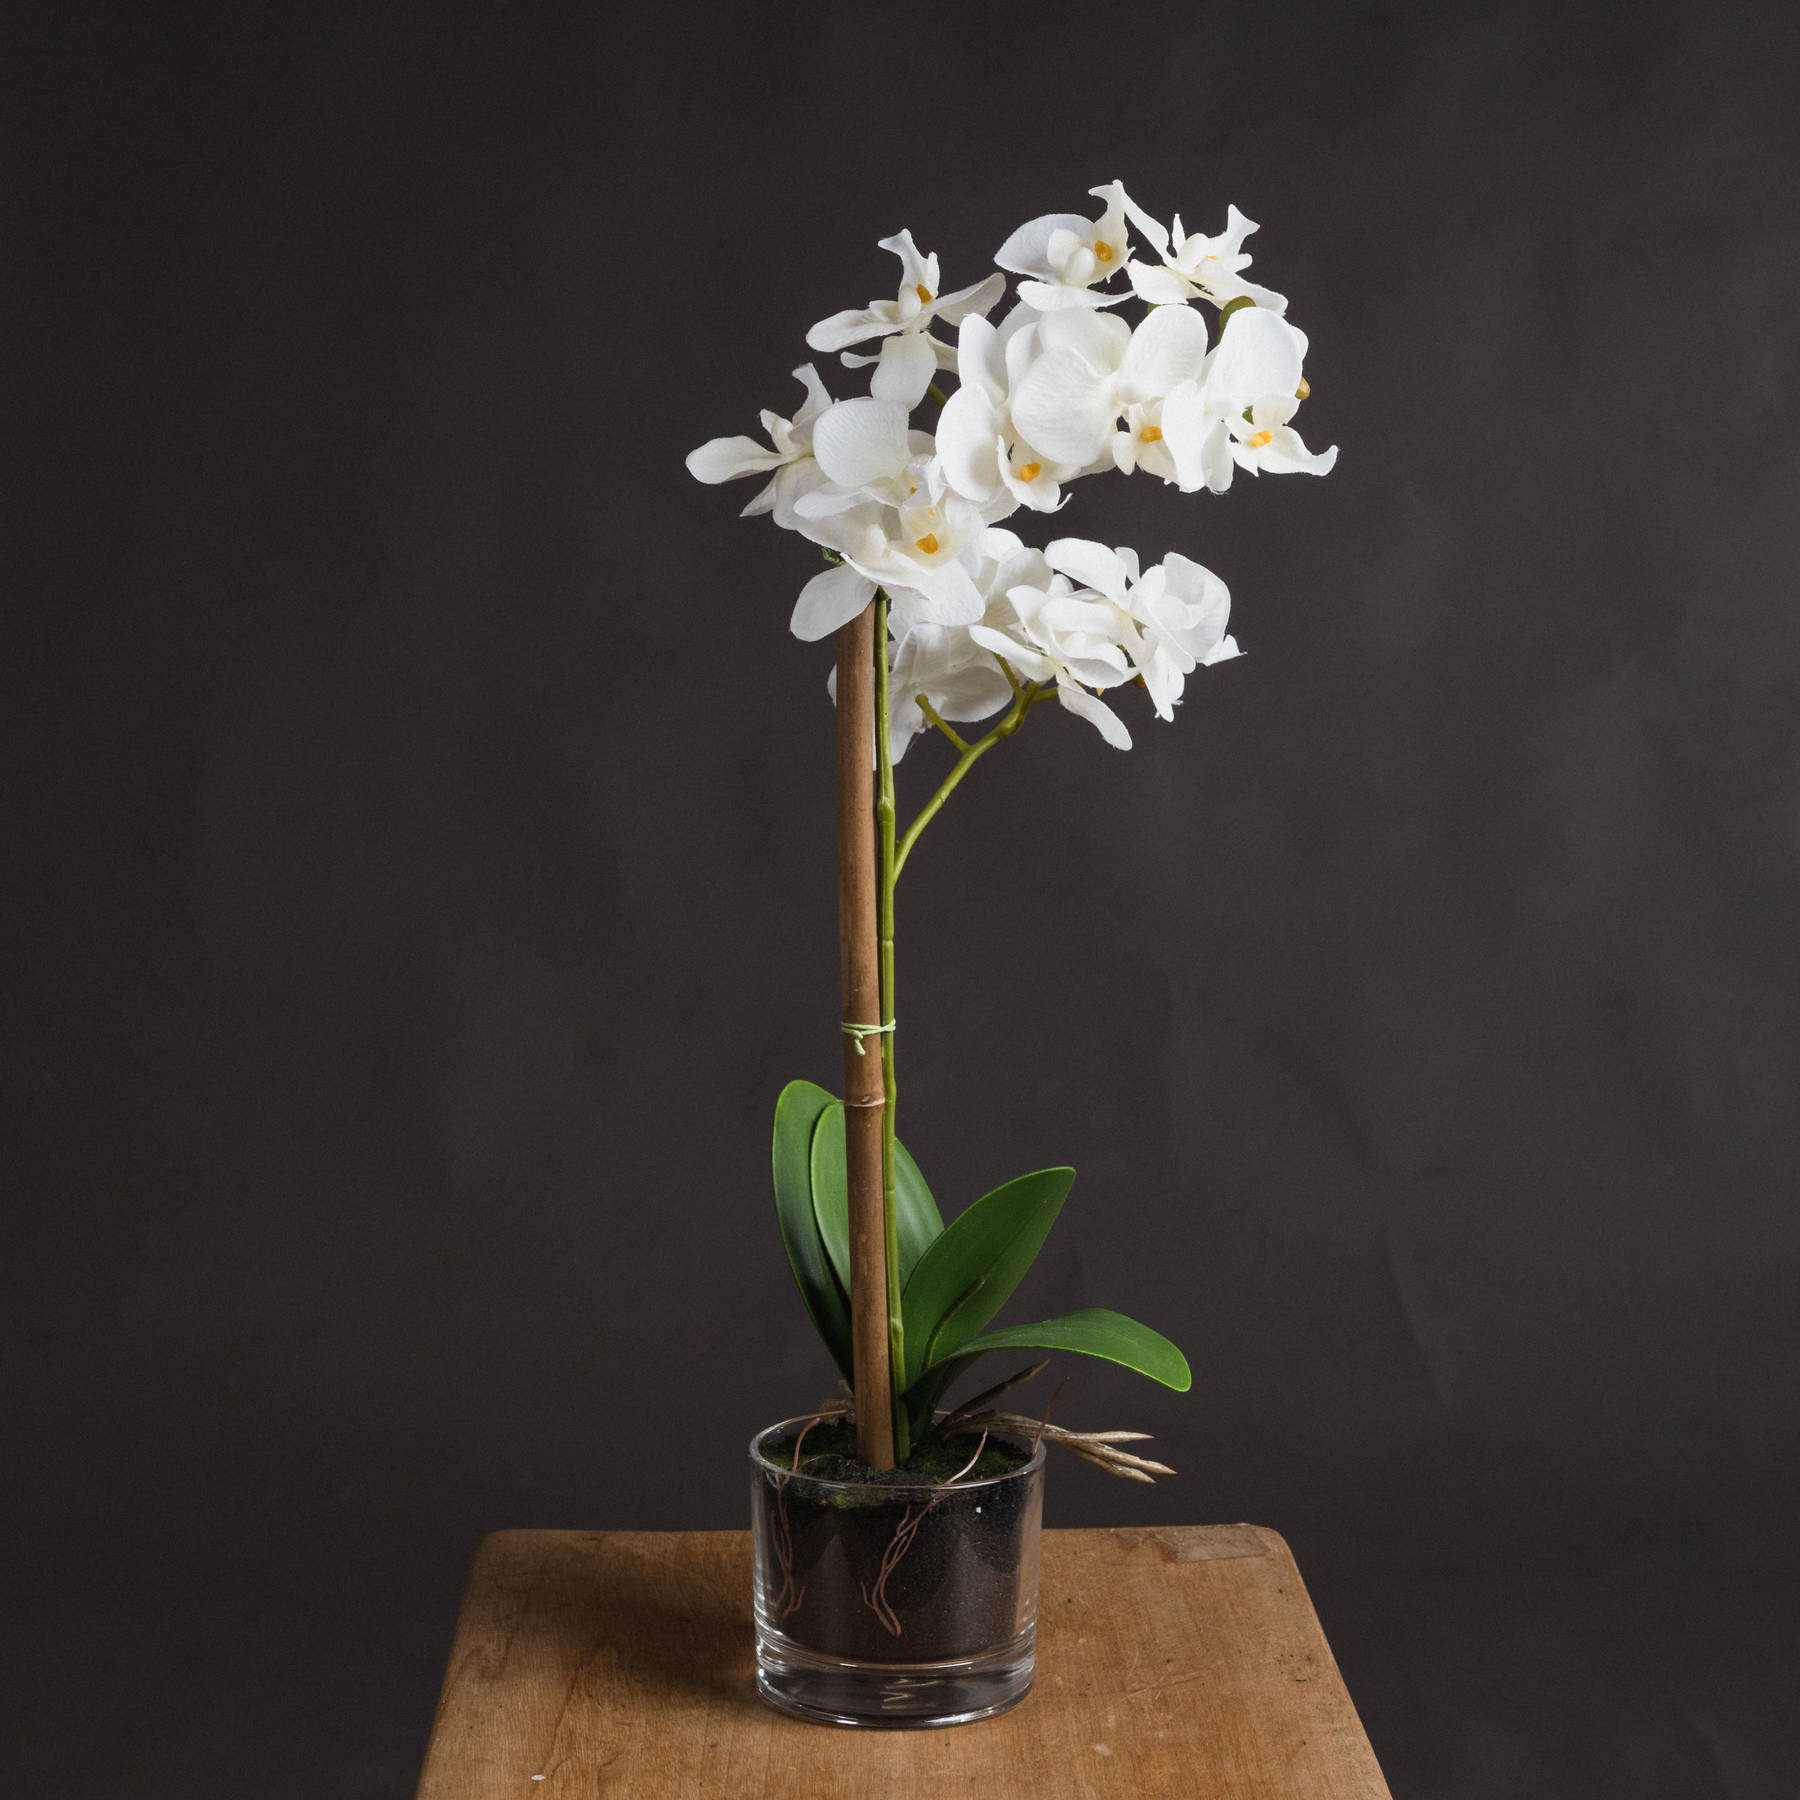 Harmony White Potted Orchid - Image 1